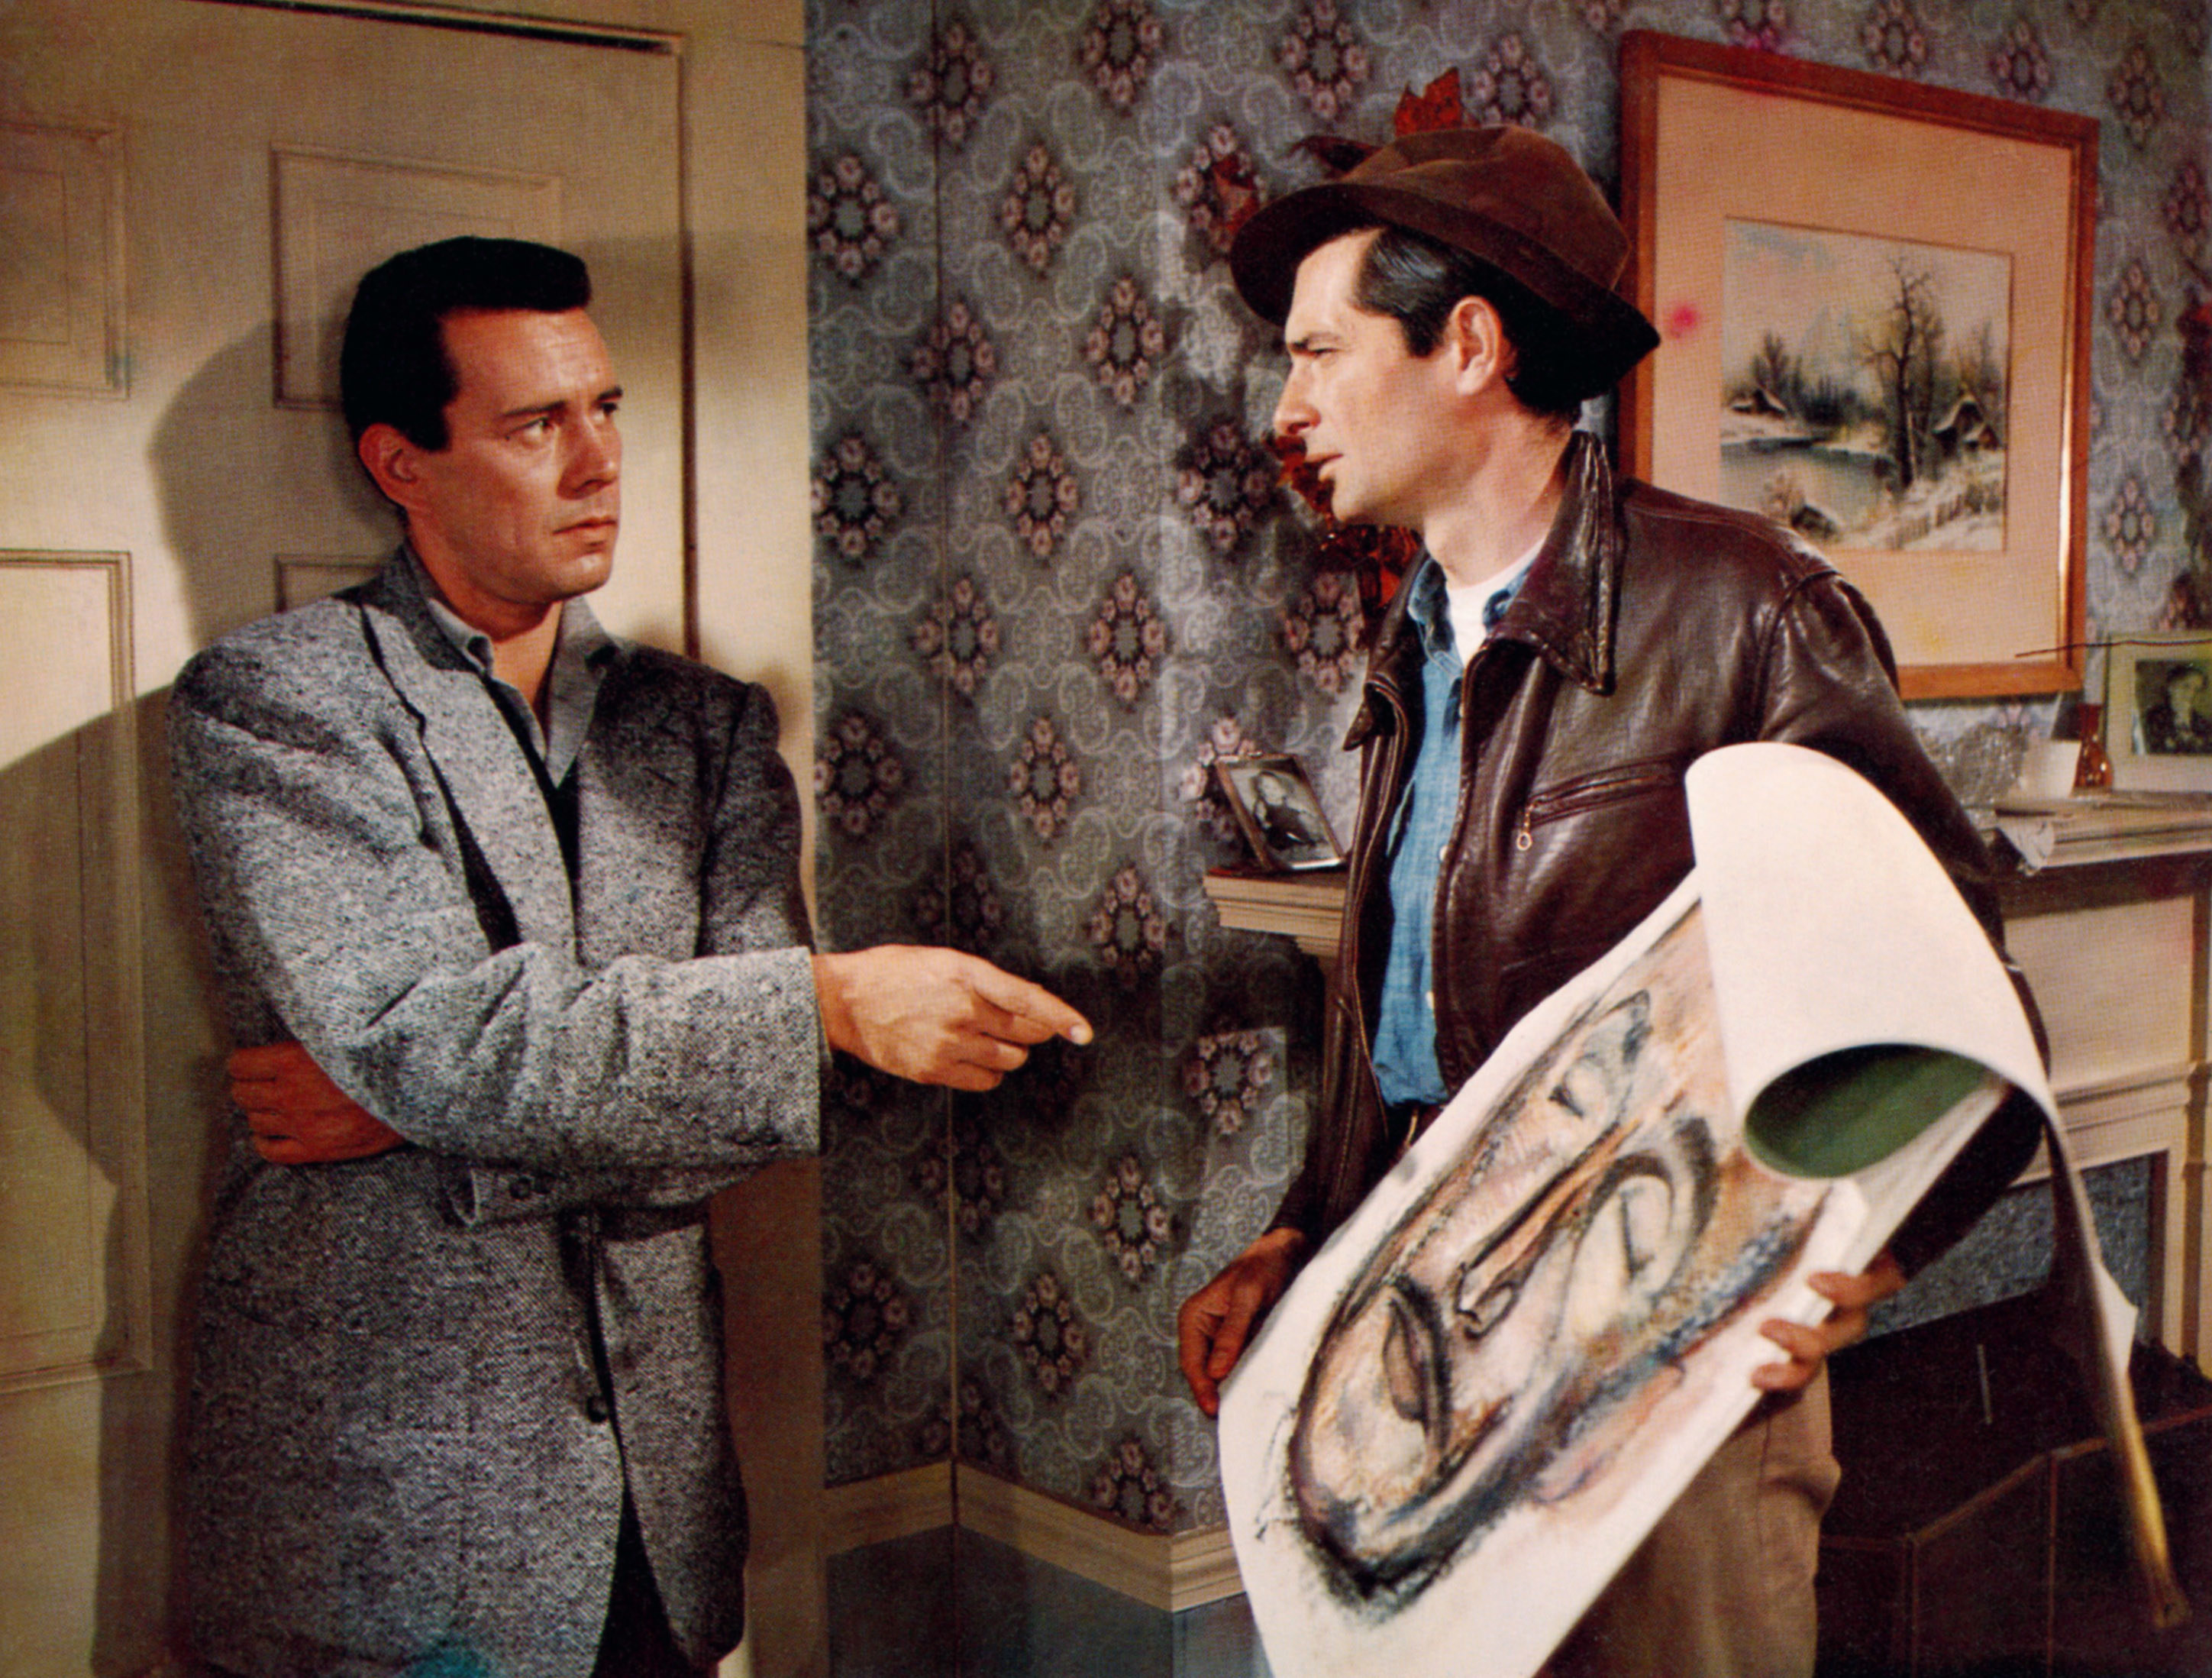 John Forsythe pointing at an illustration Royal Dano is holding.